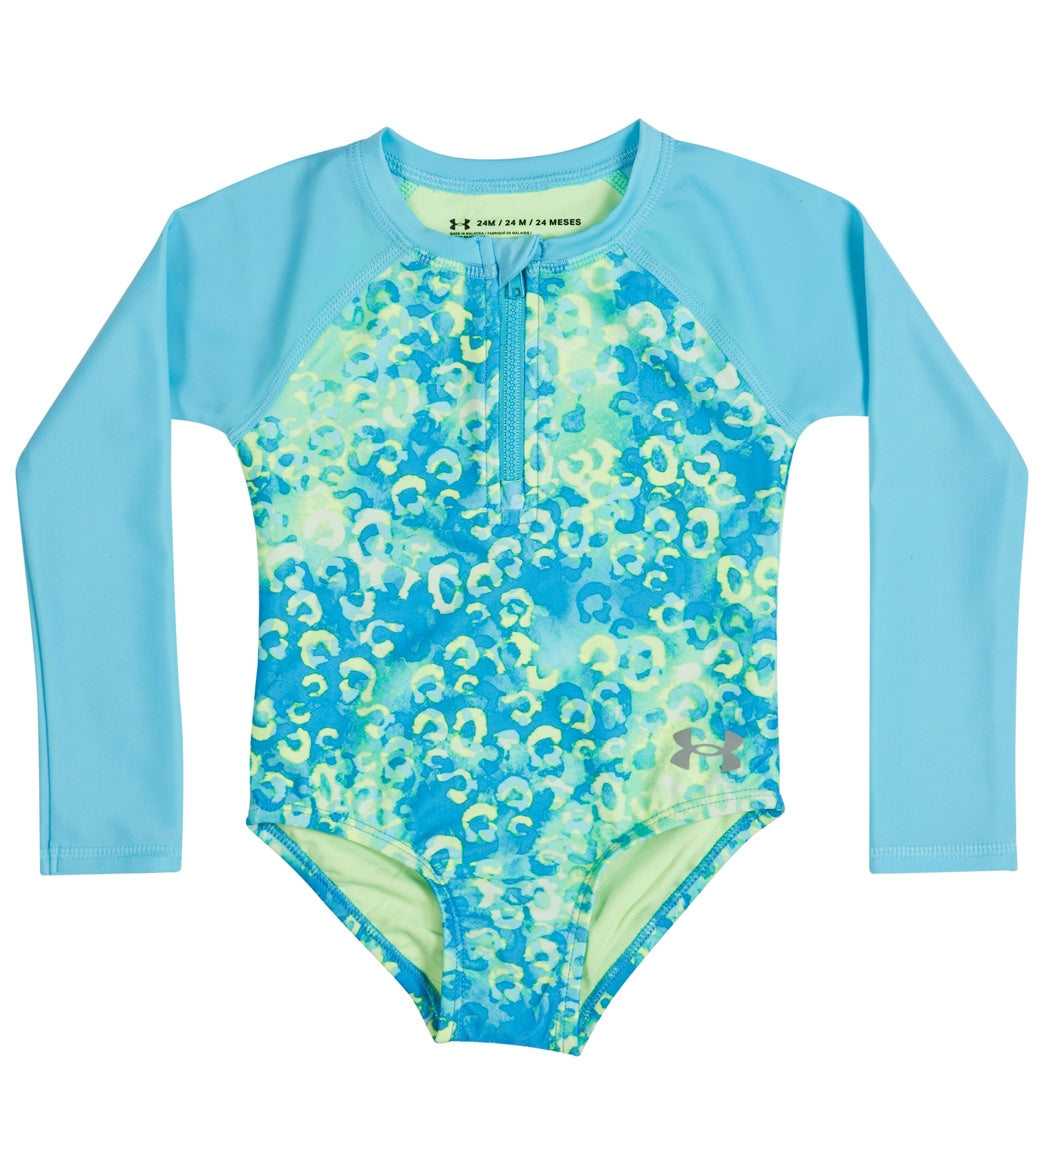 Under Armour Girls Shadow Cheetah Paddlesuit (Baby)